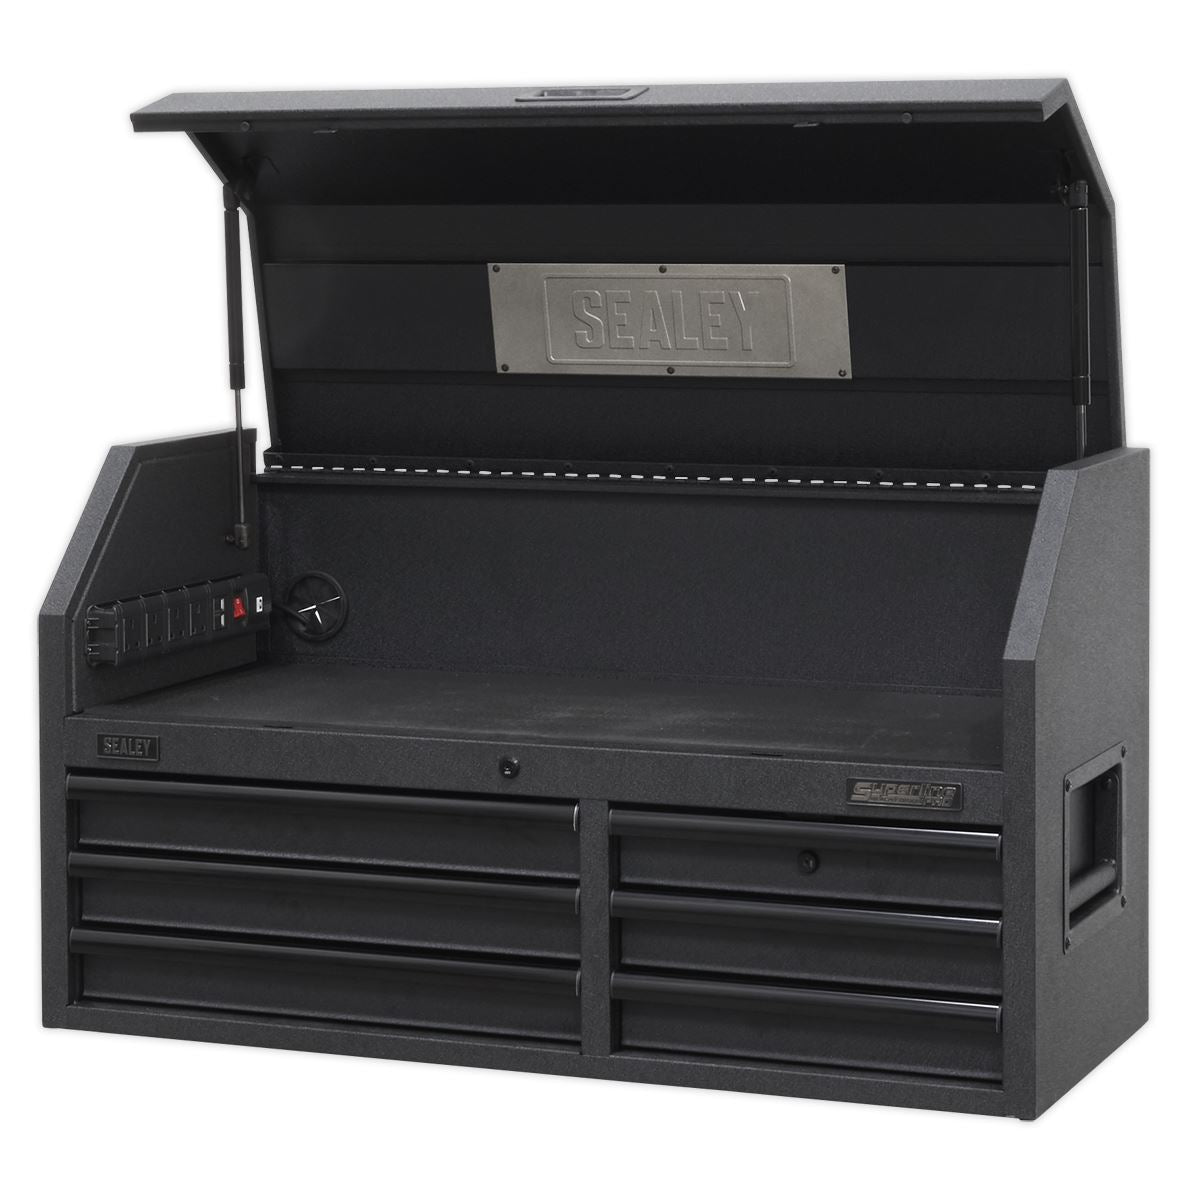 Sealey Superline Pro Topchest 6 Drawer 1030mm with Soft Close Drawers & Power Strip